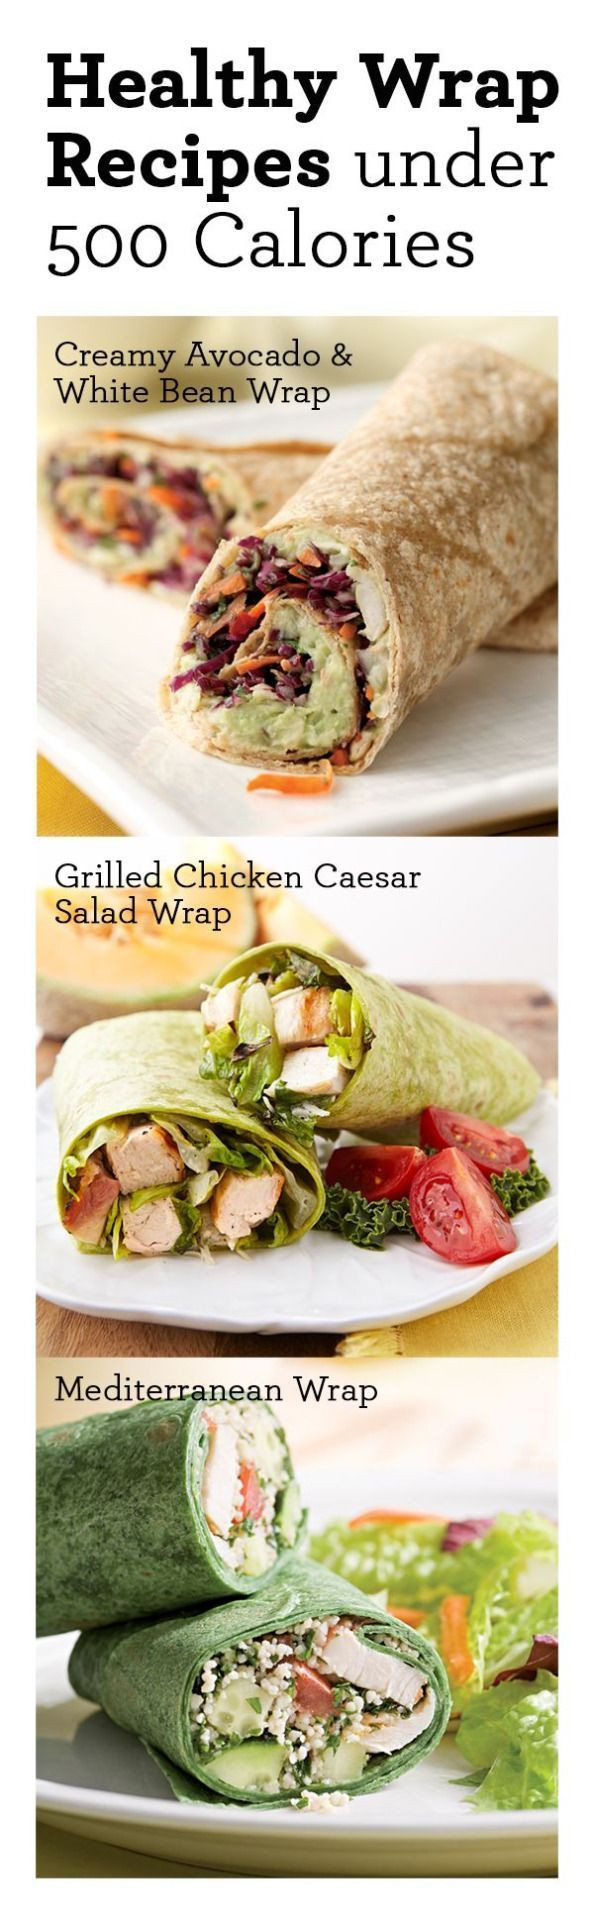 Low Calorie Wrap Recipes
 Healthy wrap recipes under 500 calories Perfect for a